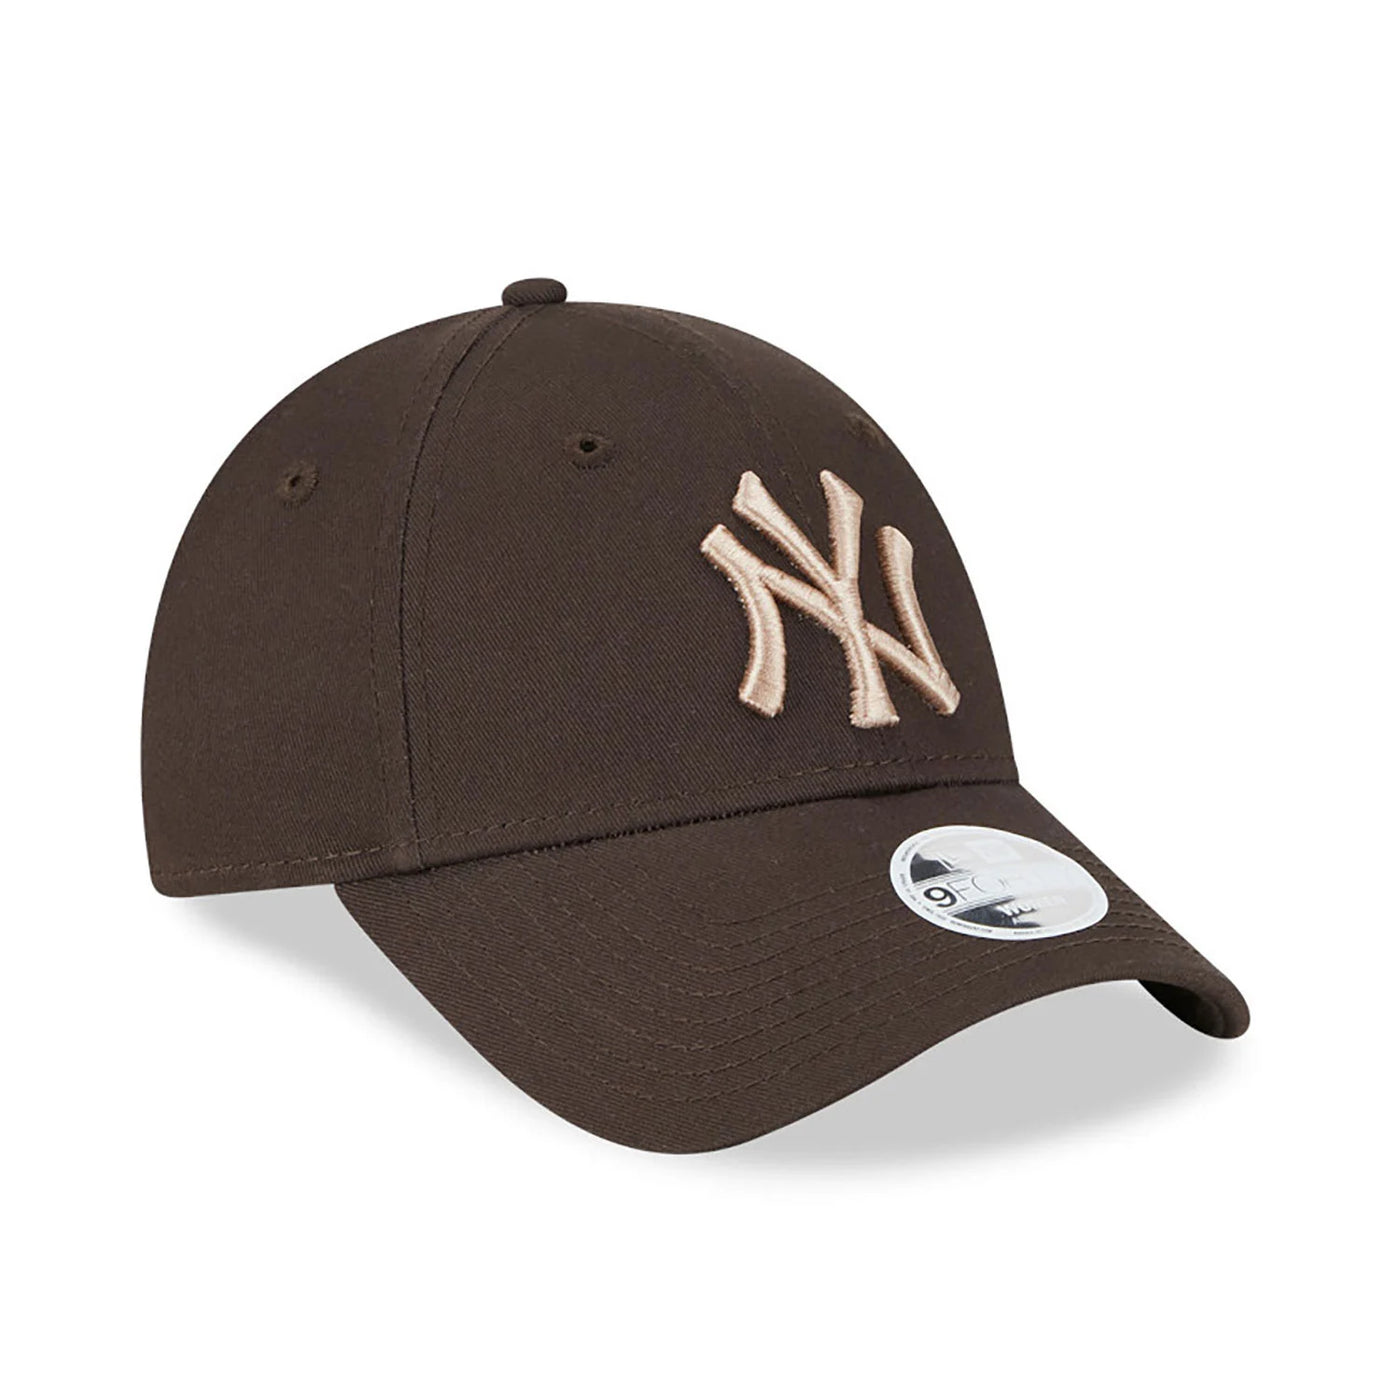 CAPPELLO 9FORTY NEW YORK YANKEES LEAGUE ESSENTIAL NEW ERA DONNA